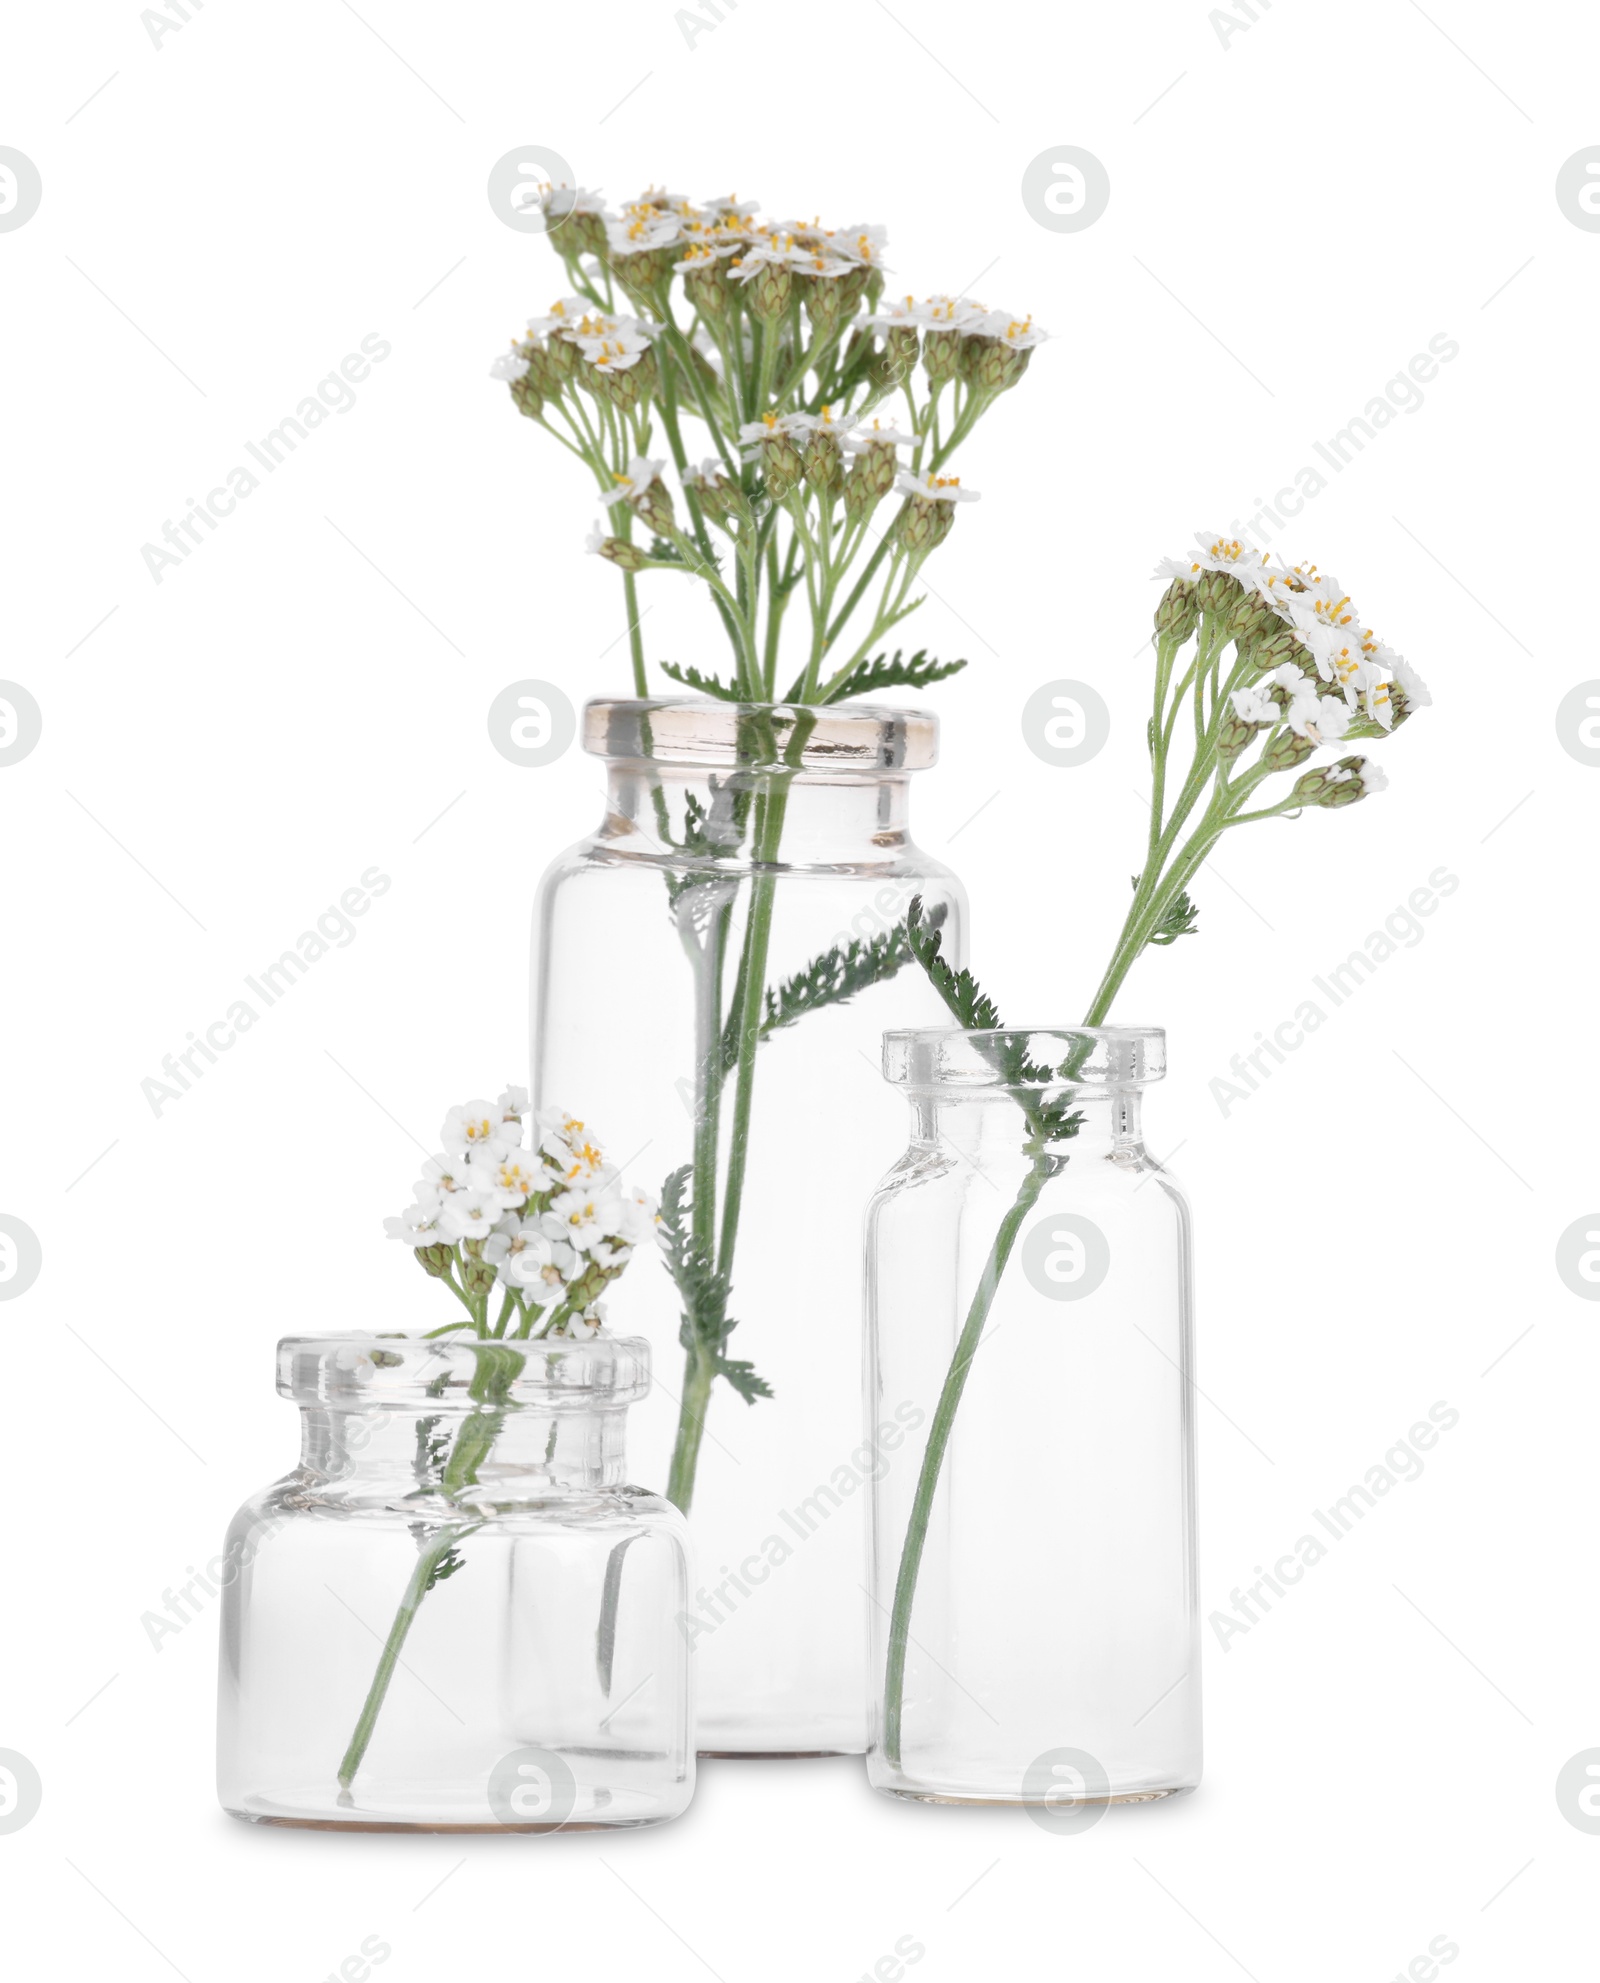 Photo of Yarrow flowers in glass bottles isolated on white